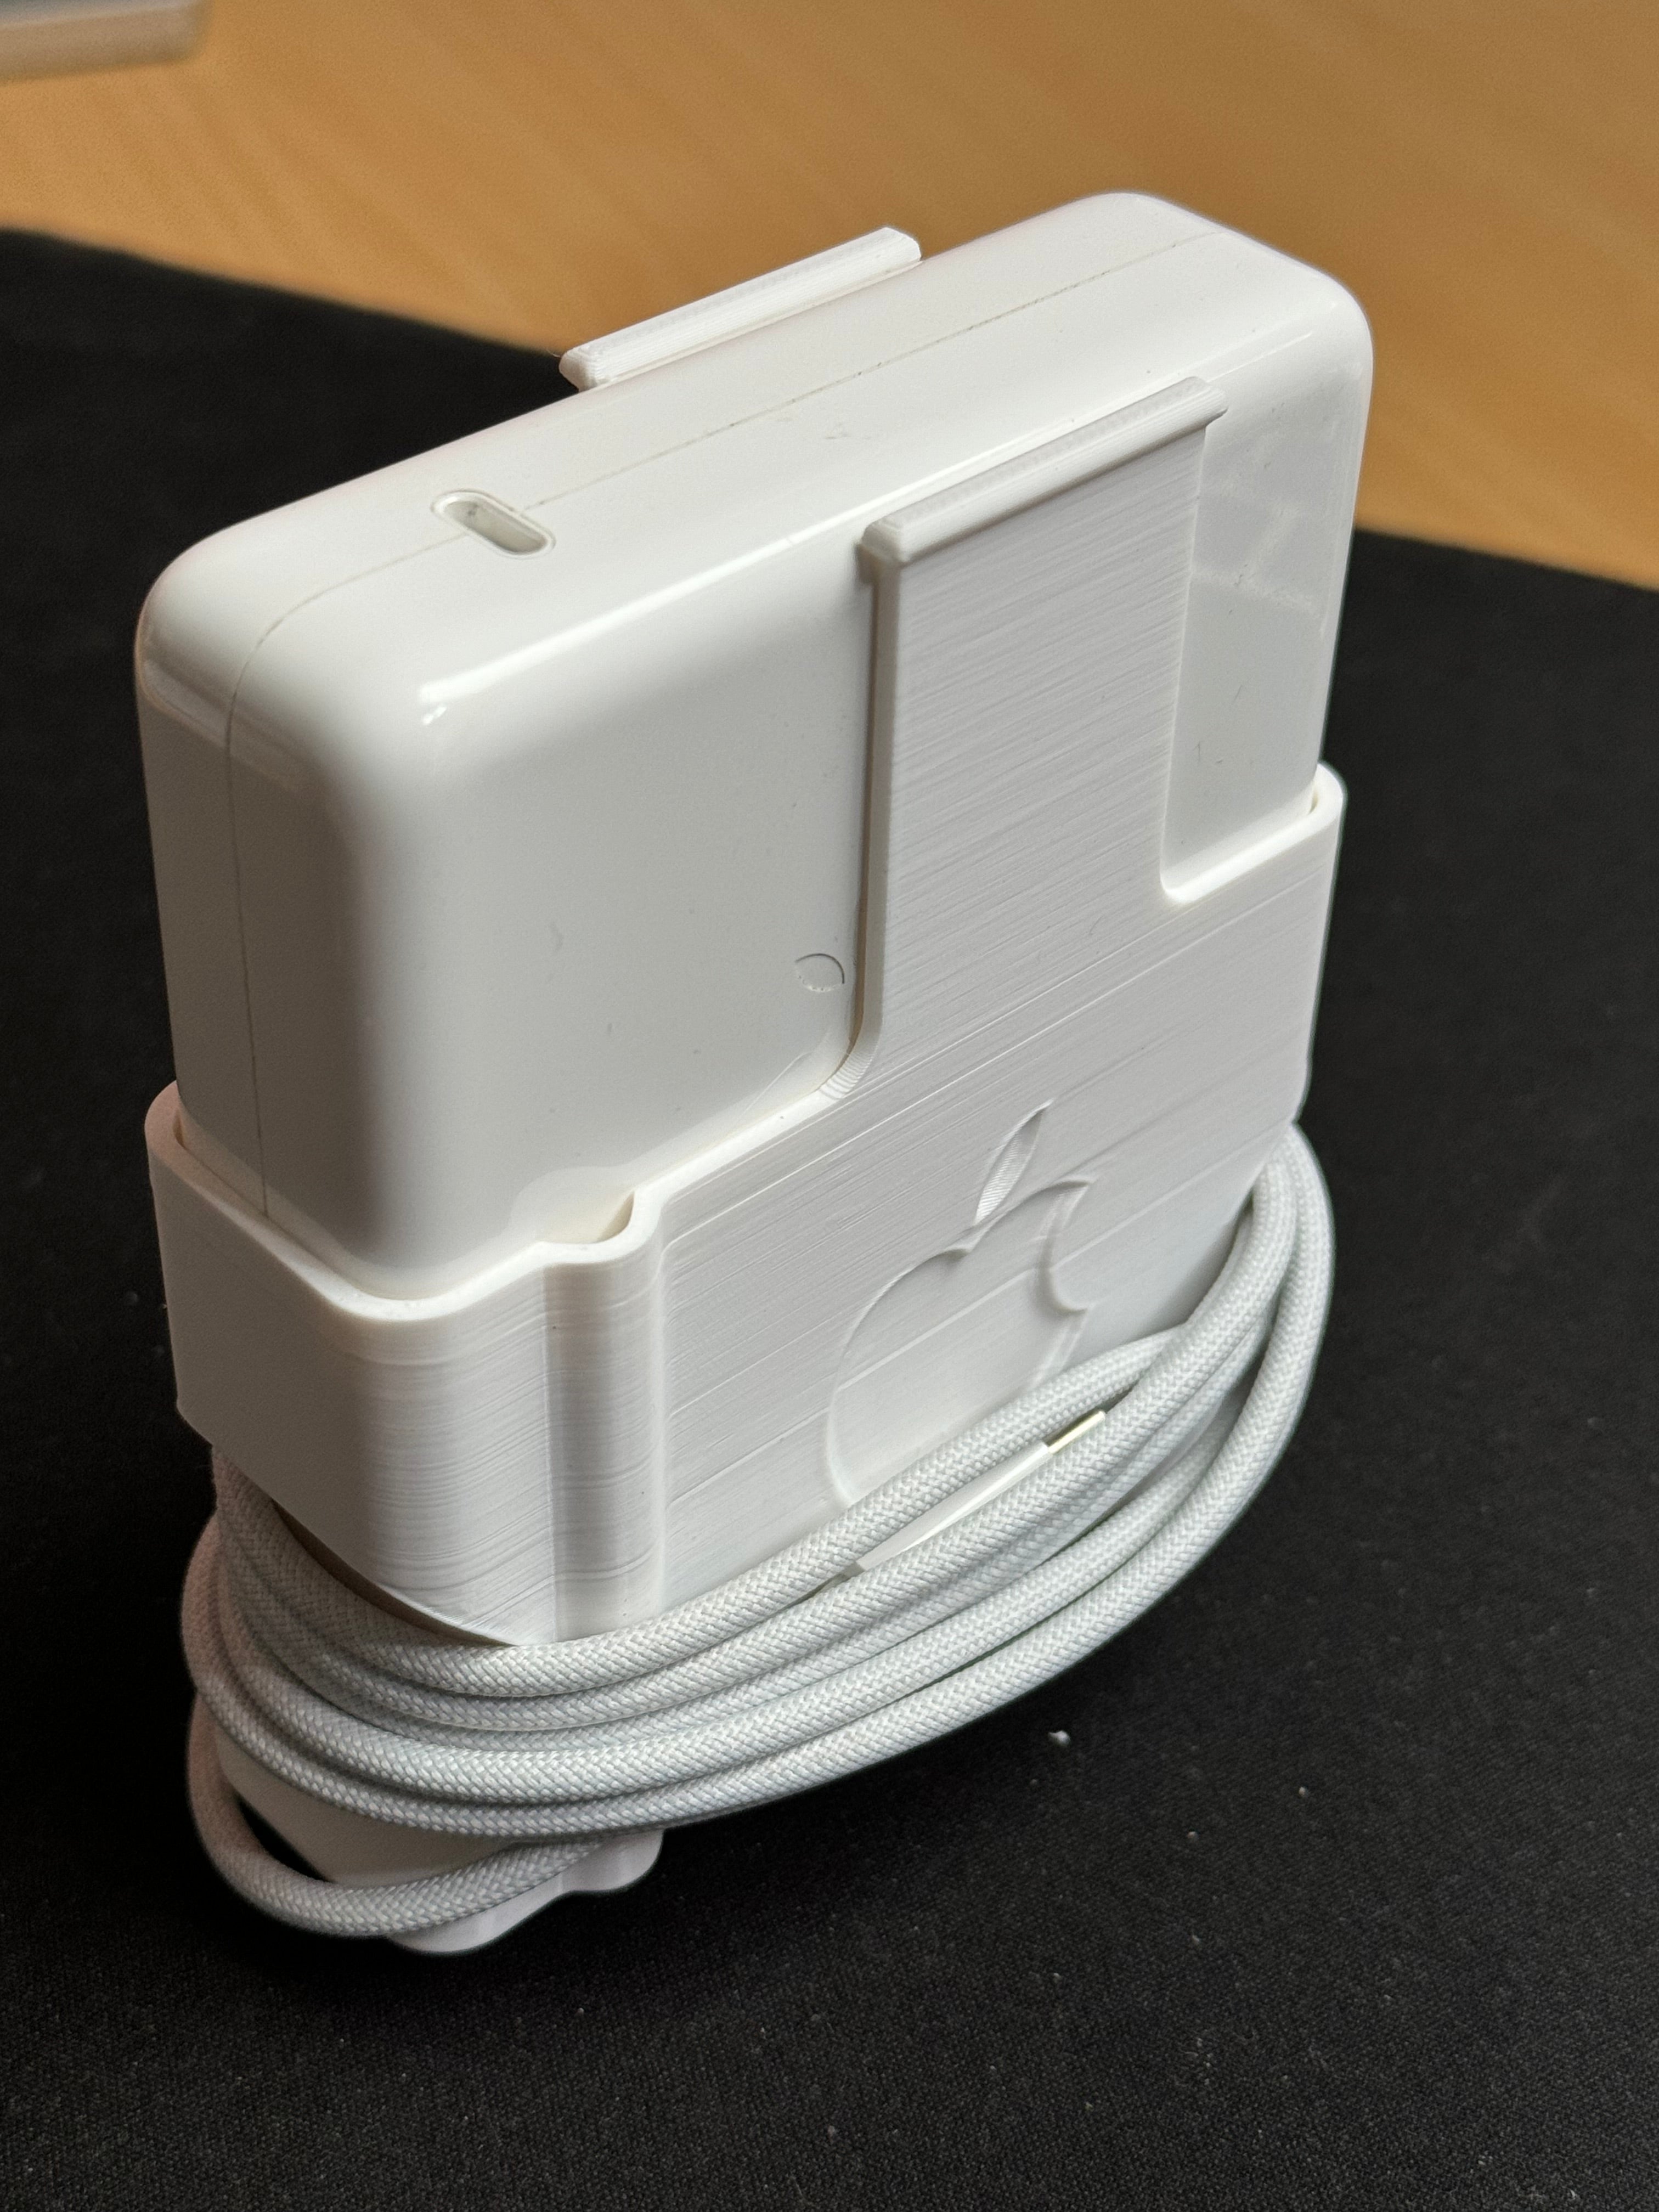 Protection and cable manager for 140W Macbook Pro charger